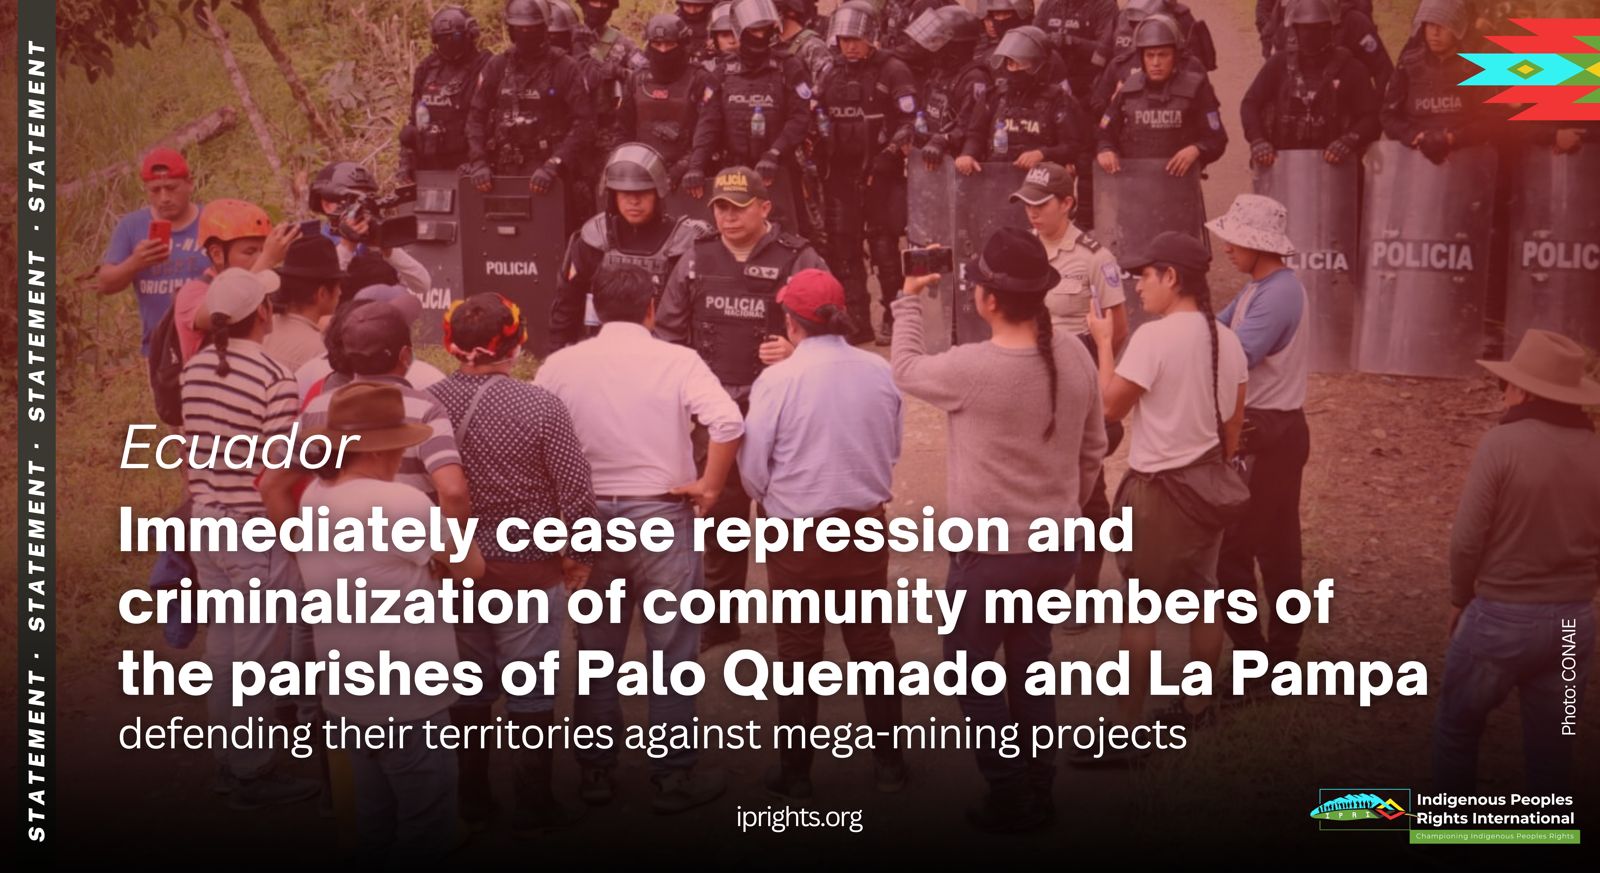 ECUADOR: Immediately cease repression and criminalization of community members of the parishes of Palo Quemado and La Pampa defending their territories against mega-mining projects